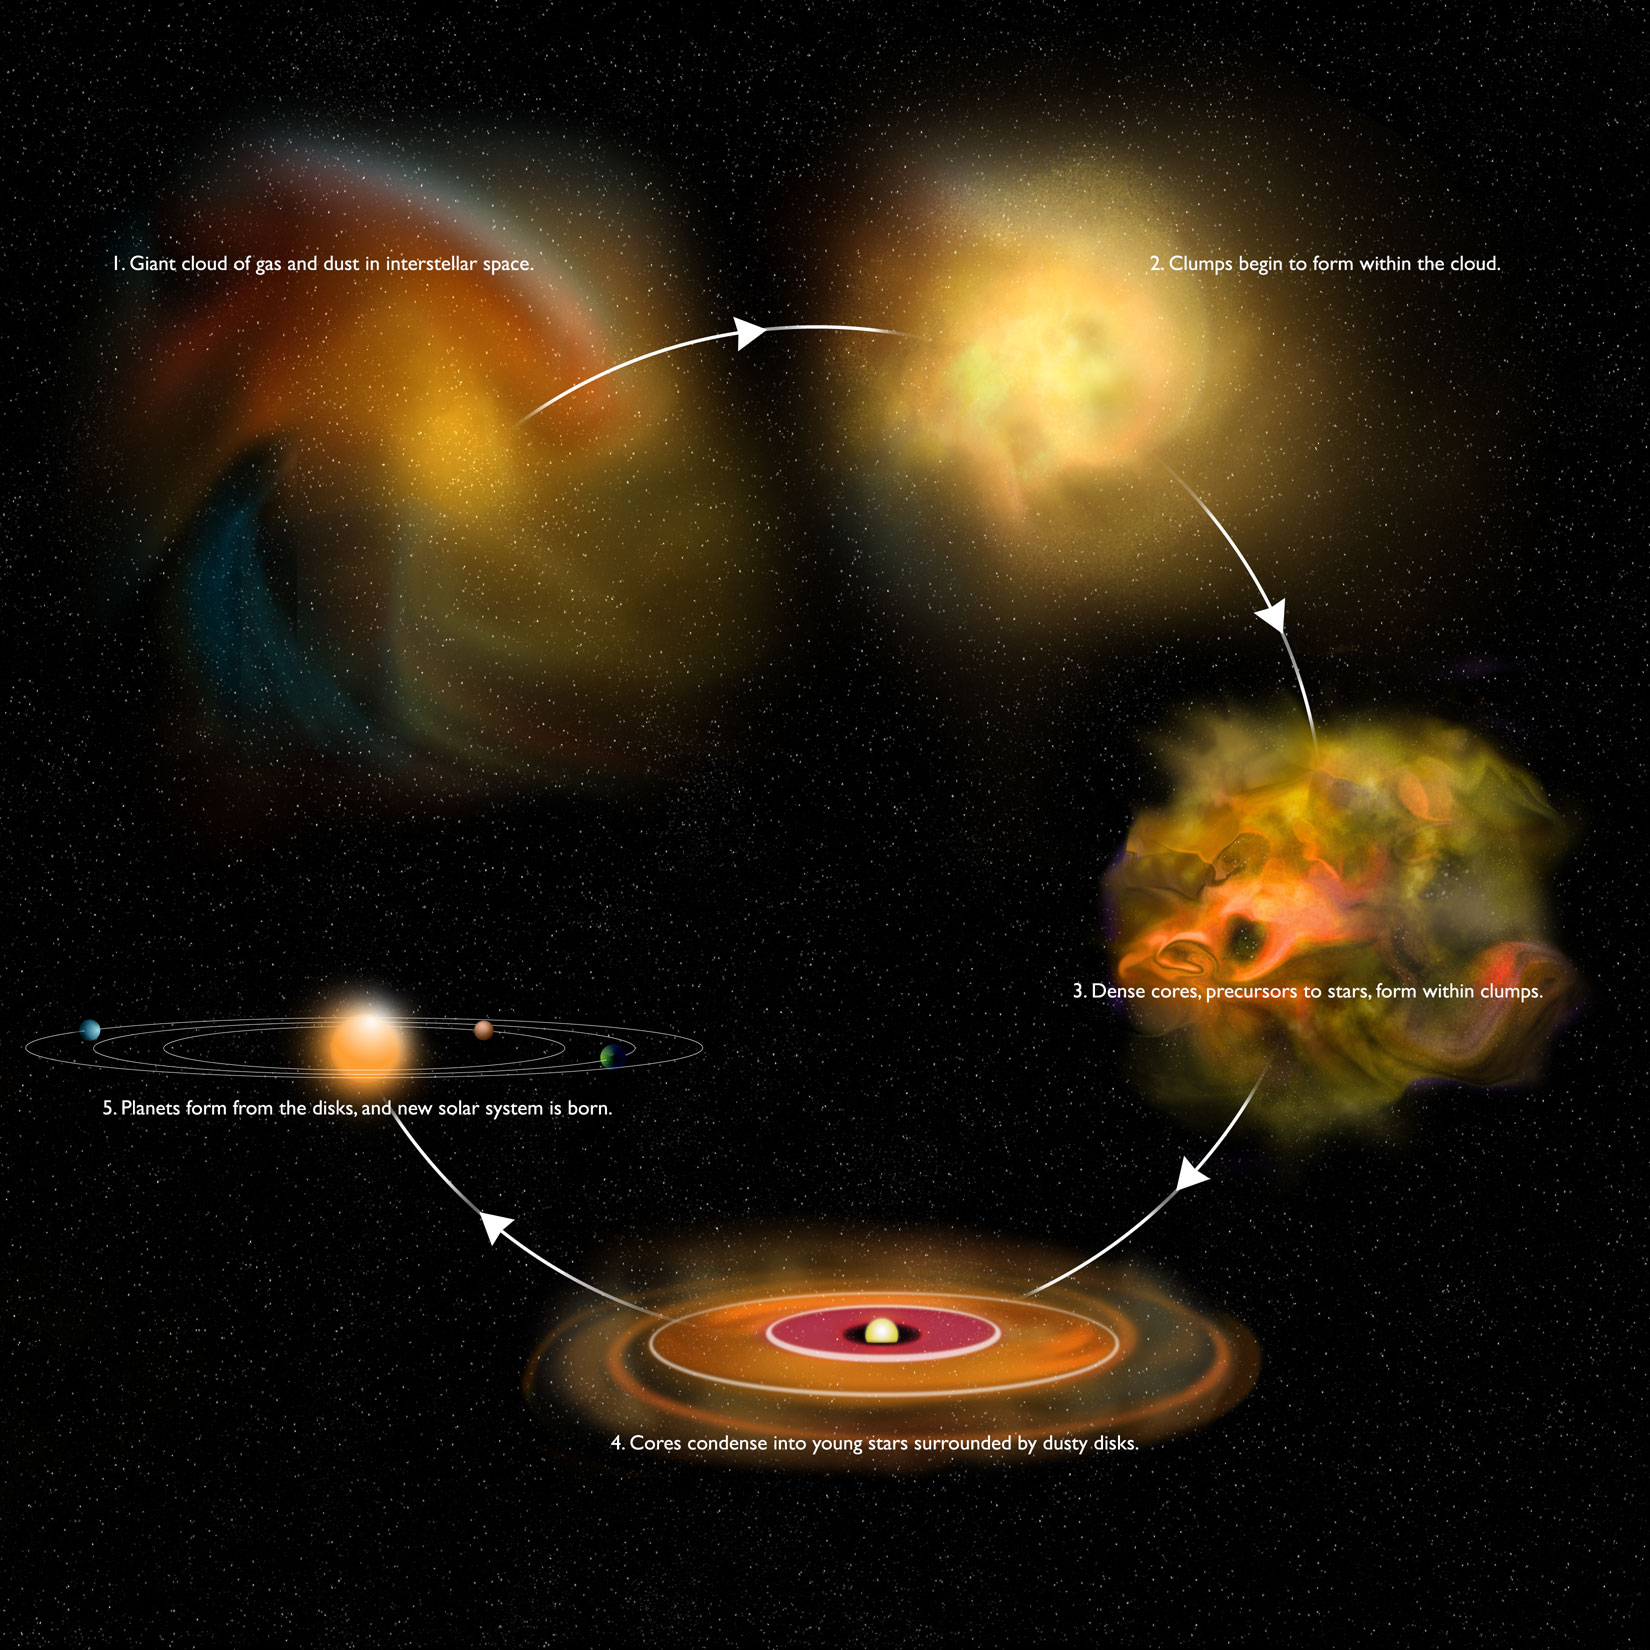 <span style="font-size:16px;position:relative;top:-60px">[CREDIT: Bill Saxton, NRAO/AUI/NSF](https://phys.org/news/2012-03-astronomers-rare-peek-early-stage.html)</span>